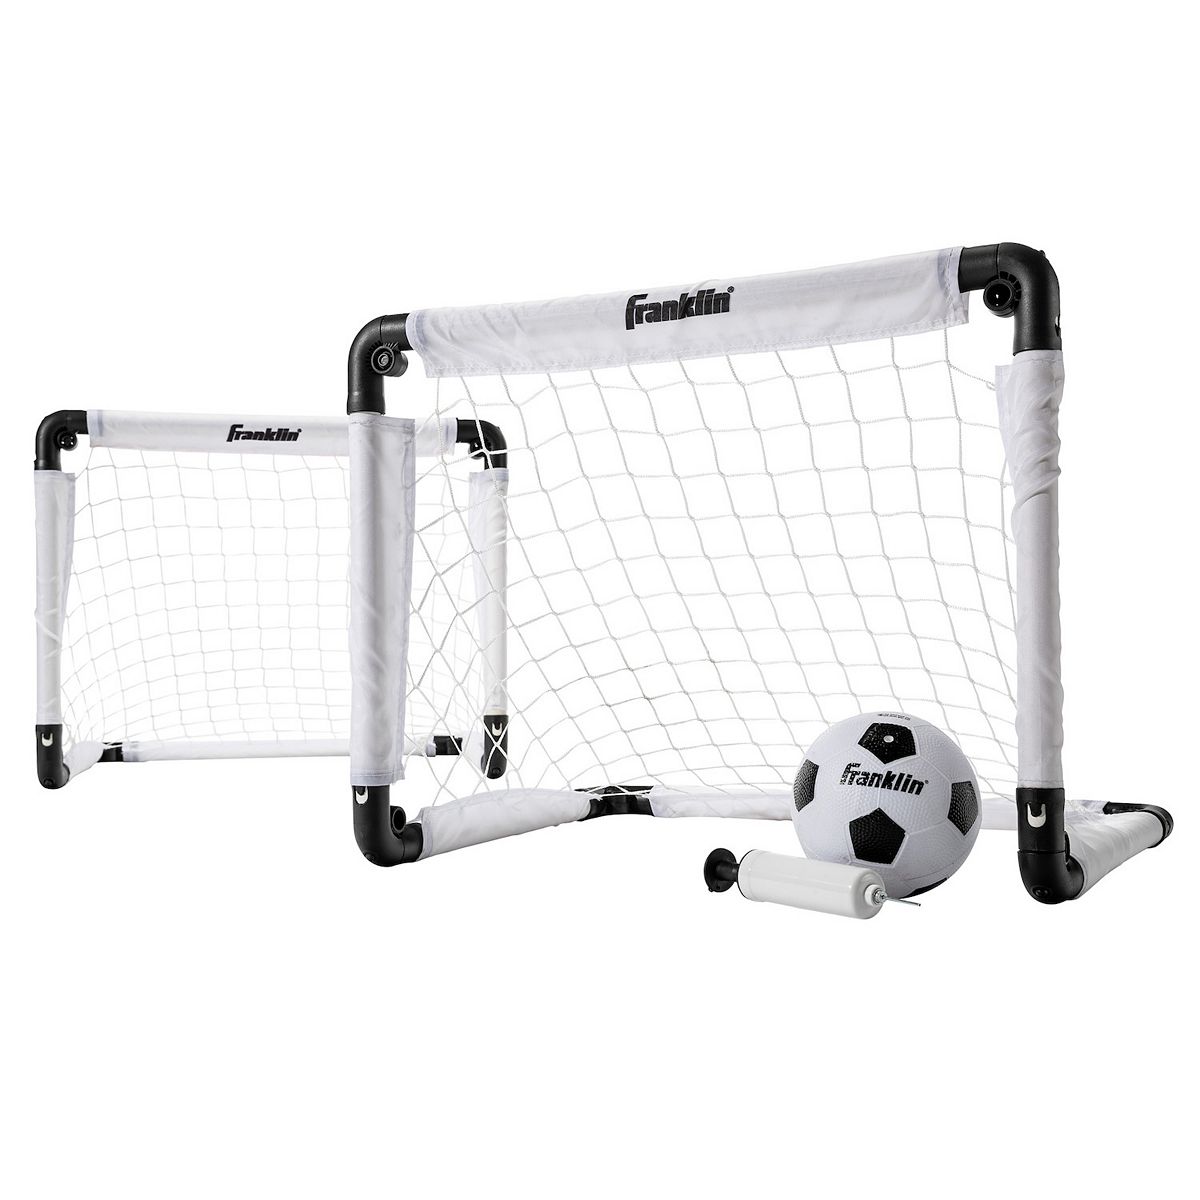 Two white and black Nets from the Franklin Sports MLS Mini Insta Indoor Soccer Set with a Soccer Ball